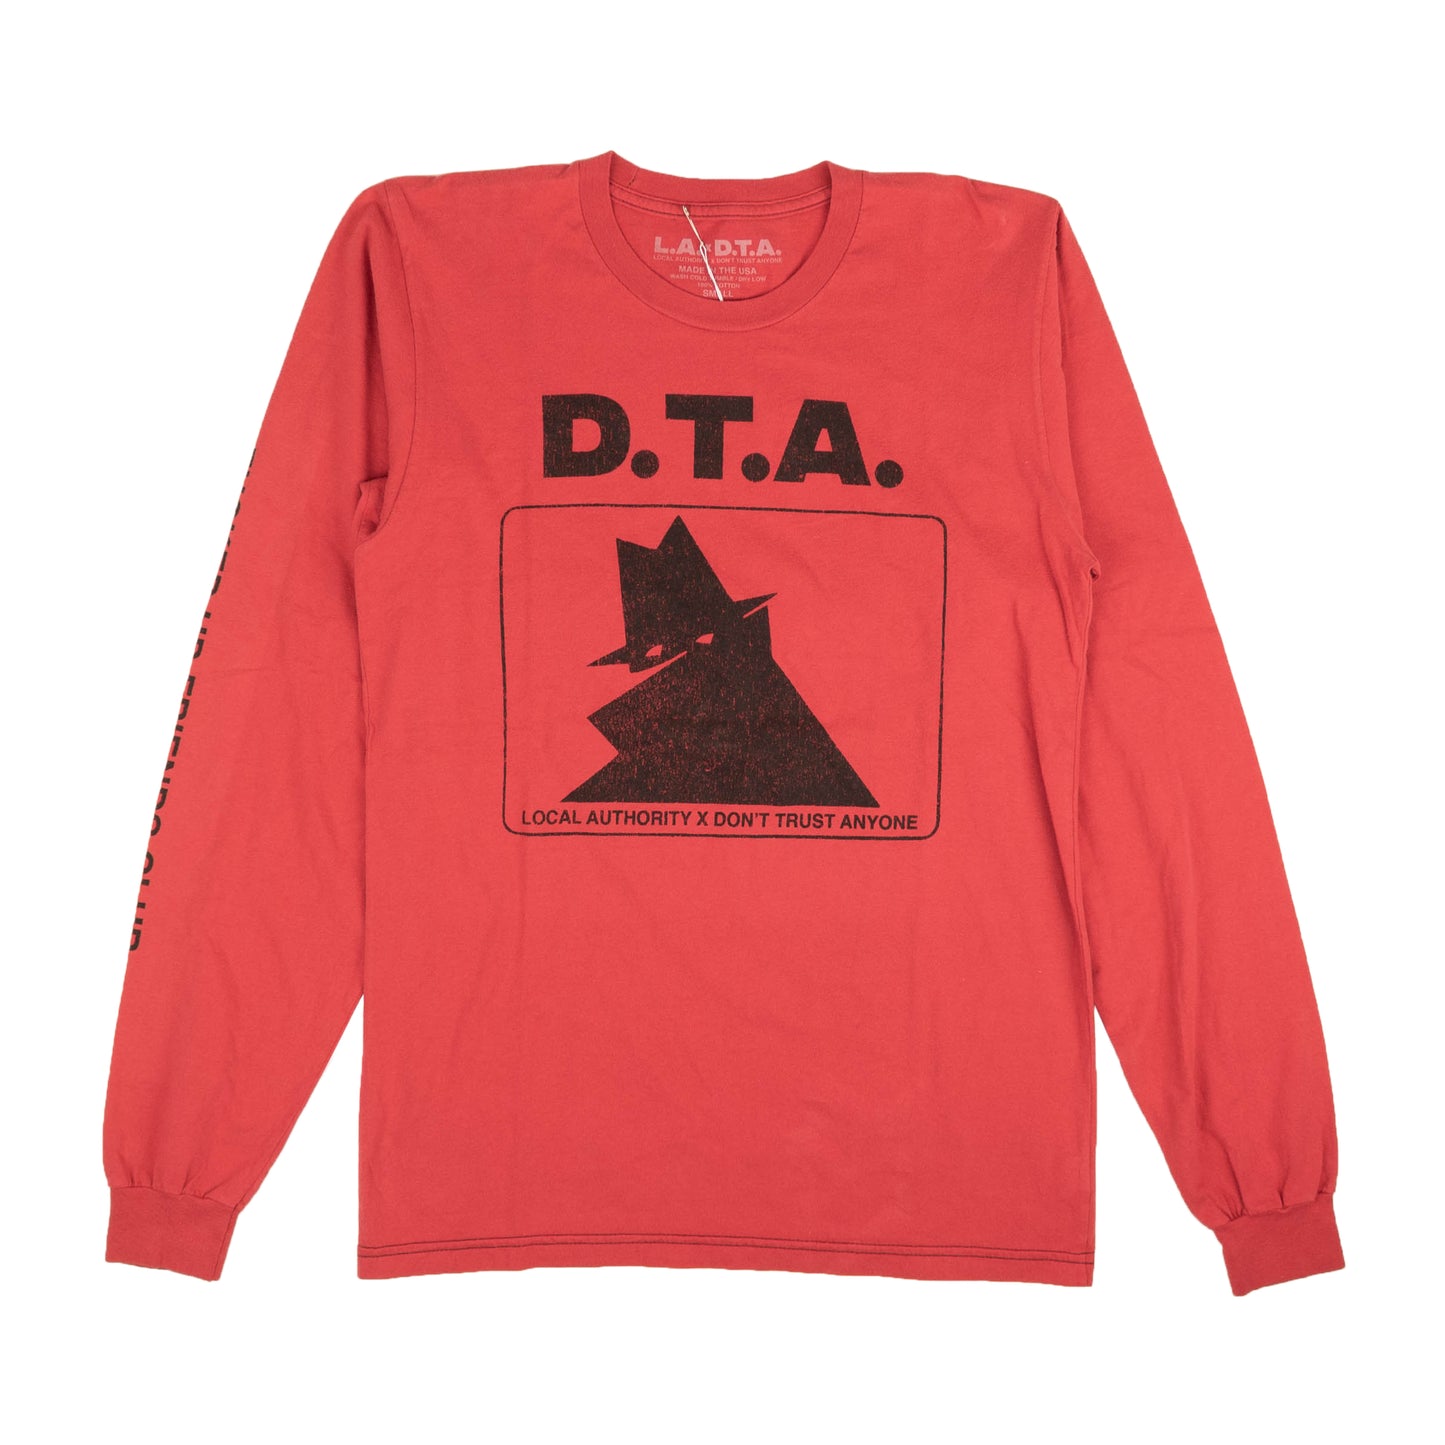 Local Authority X Don'T Trust Anyone Crooke Long Sleeve T-Shirt - Red